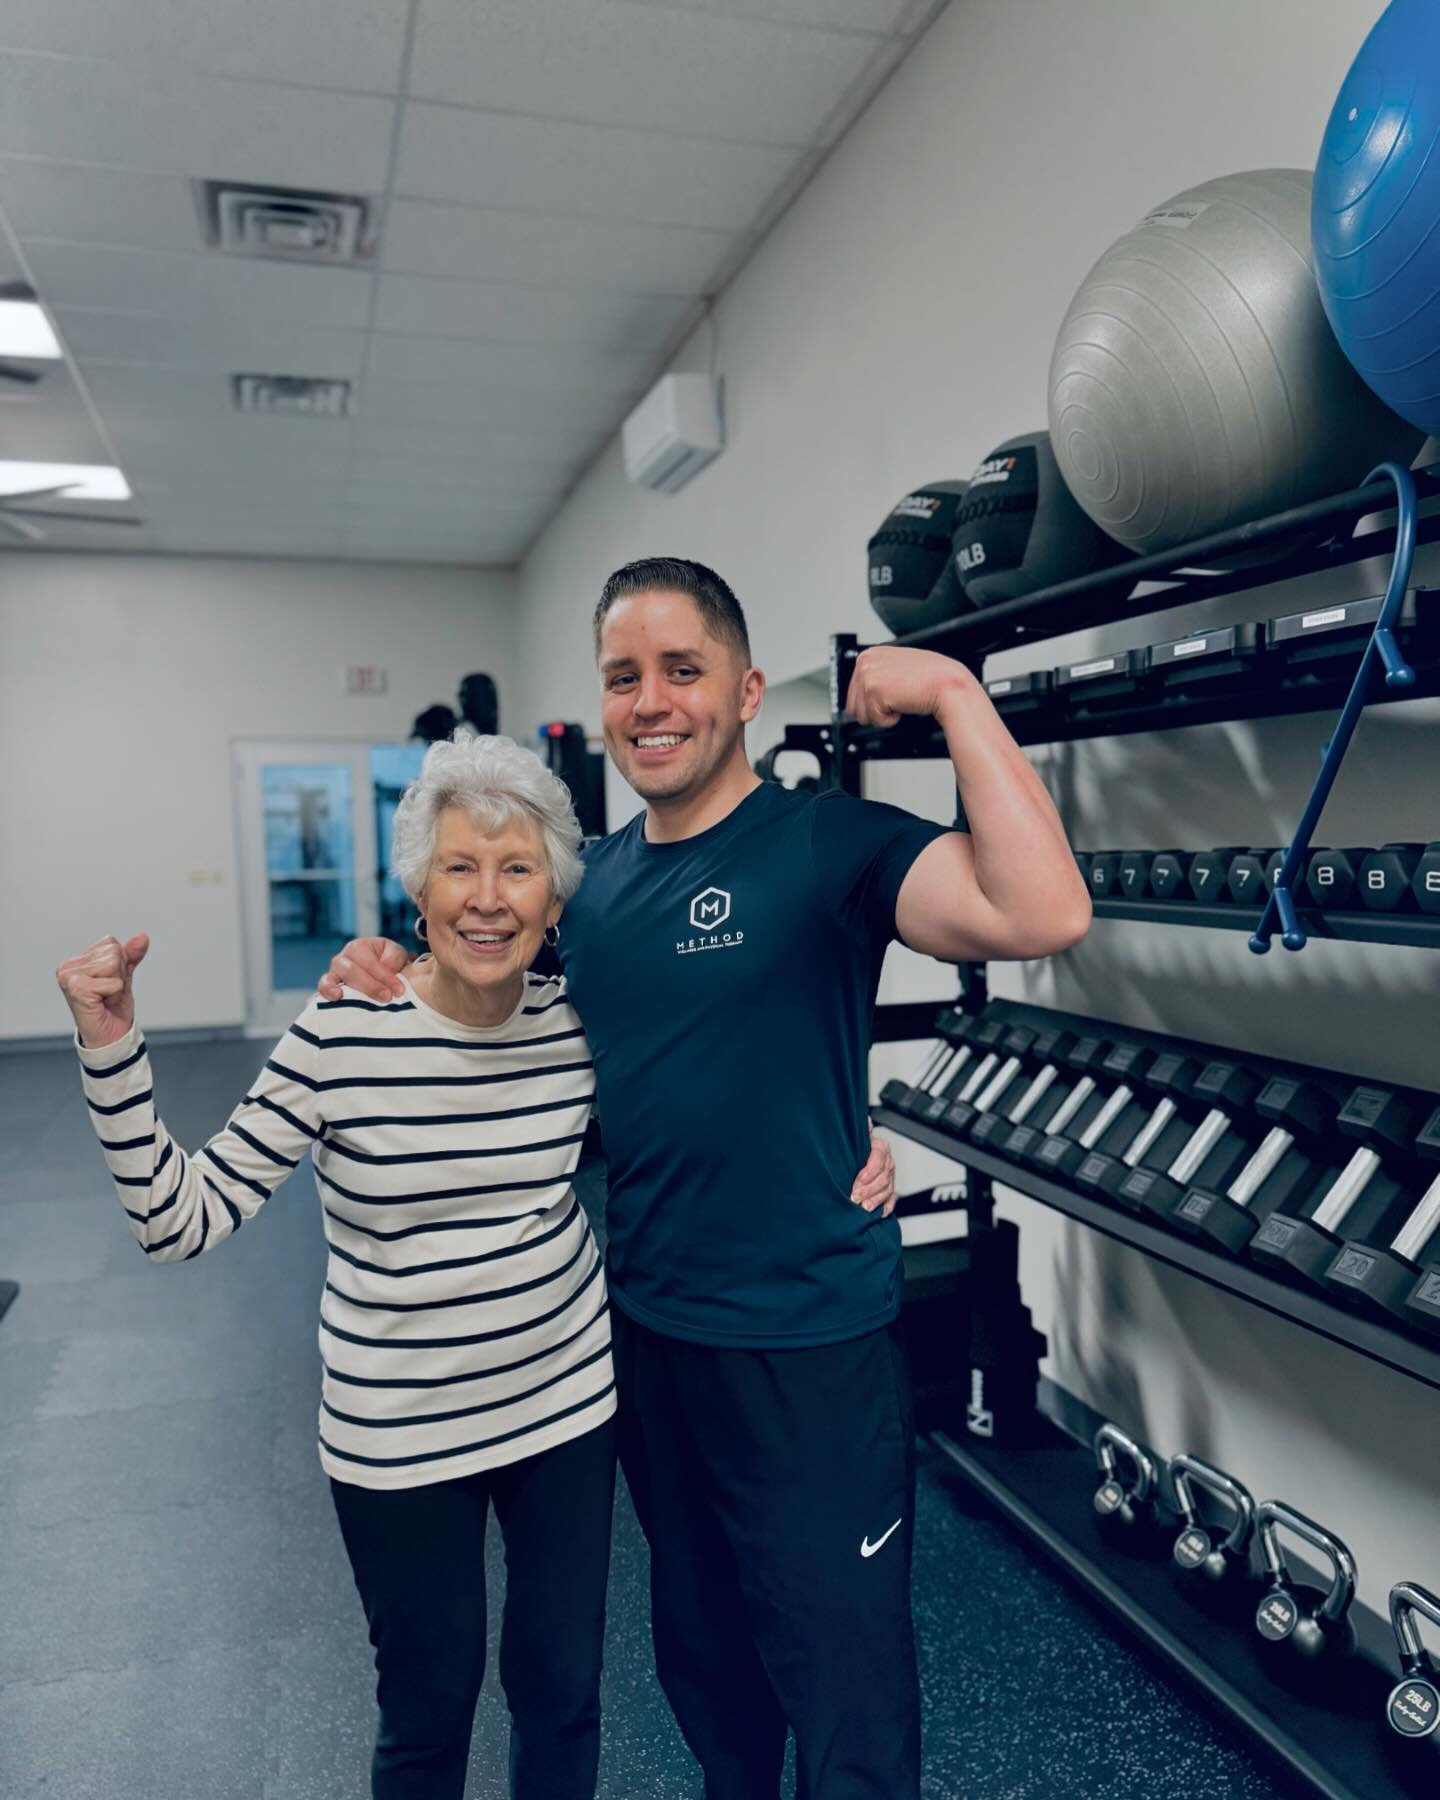 Celebrating a true inspiration, Ms Penny turns 8️⃣5️⃣ today and is only getting STRONGER! 

This beautiful &amp; dedicated woman never misses a strength training session, gets on her yoga mat regularly and is a pure ray of ☀️Sunshine☀️ to all she see